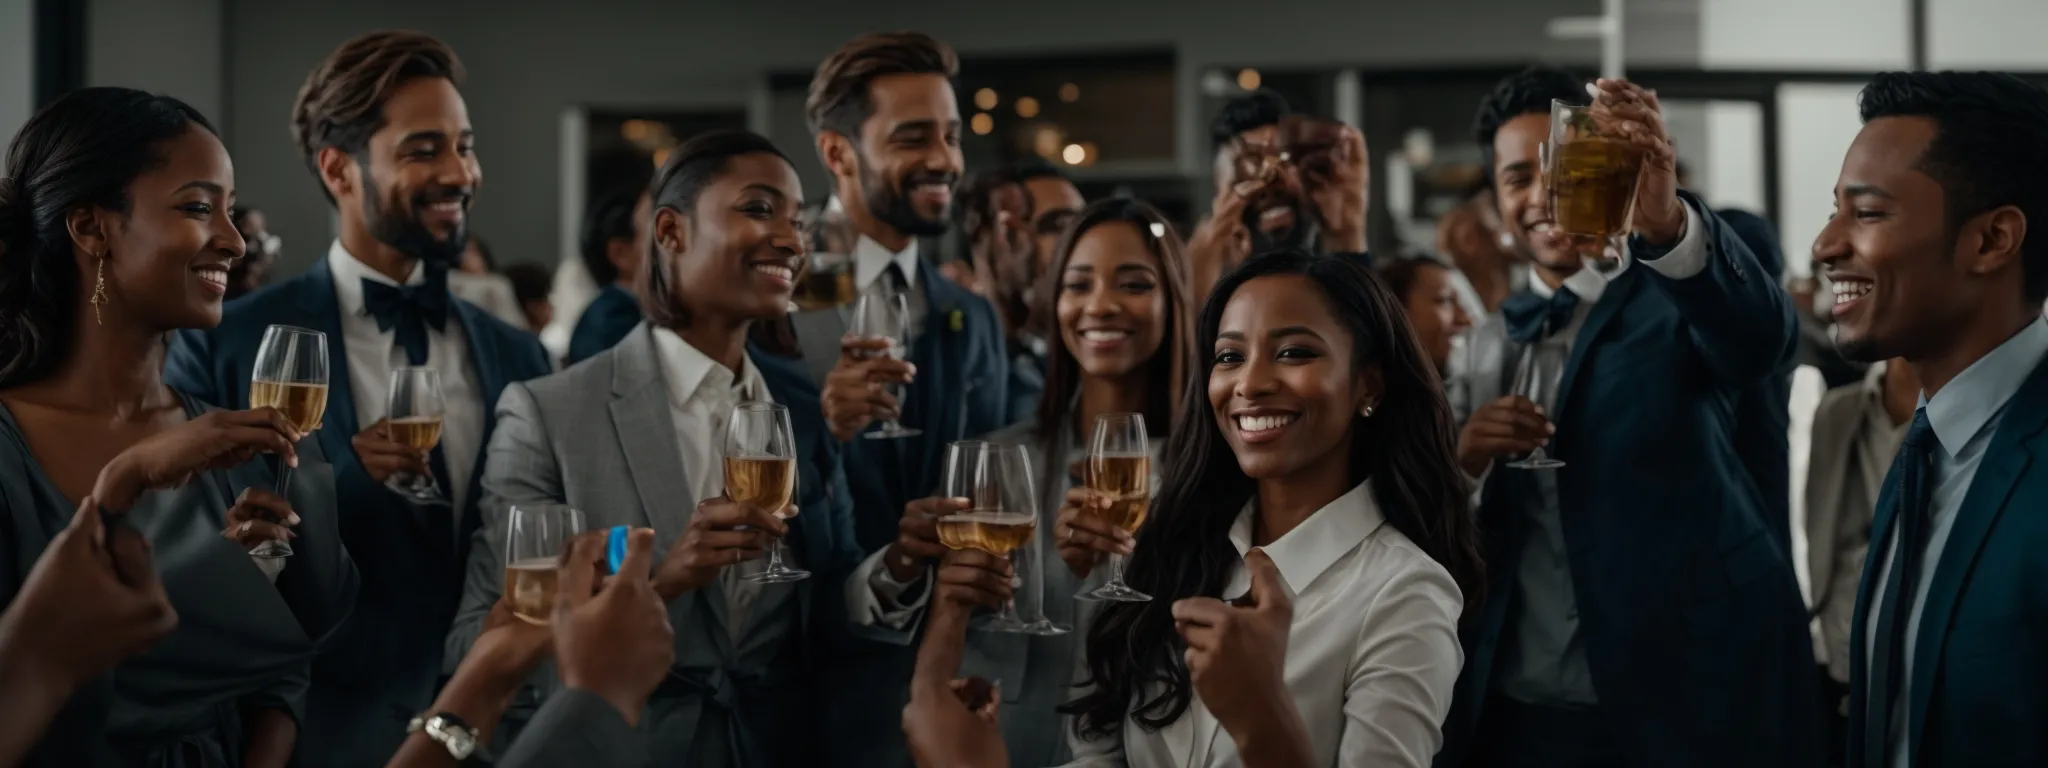 a diverse group of smiling professionals raises their glasses in a toast during a celebratory moment in a sleek, modern office.